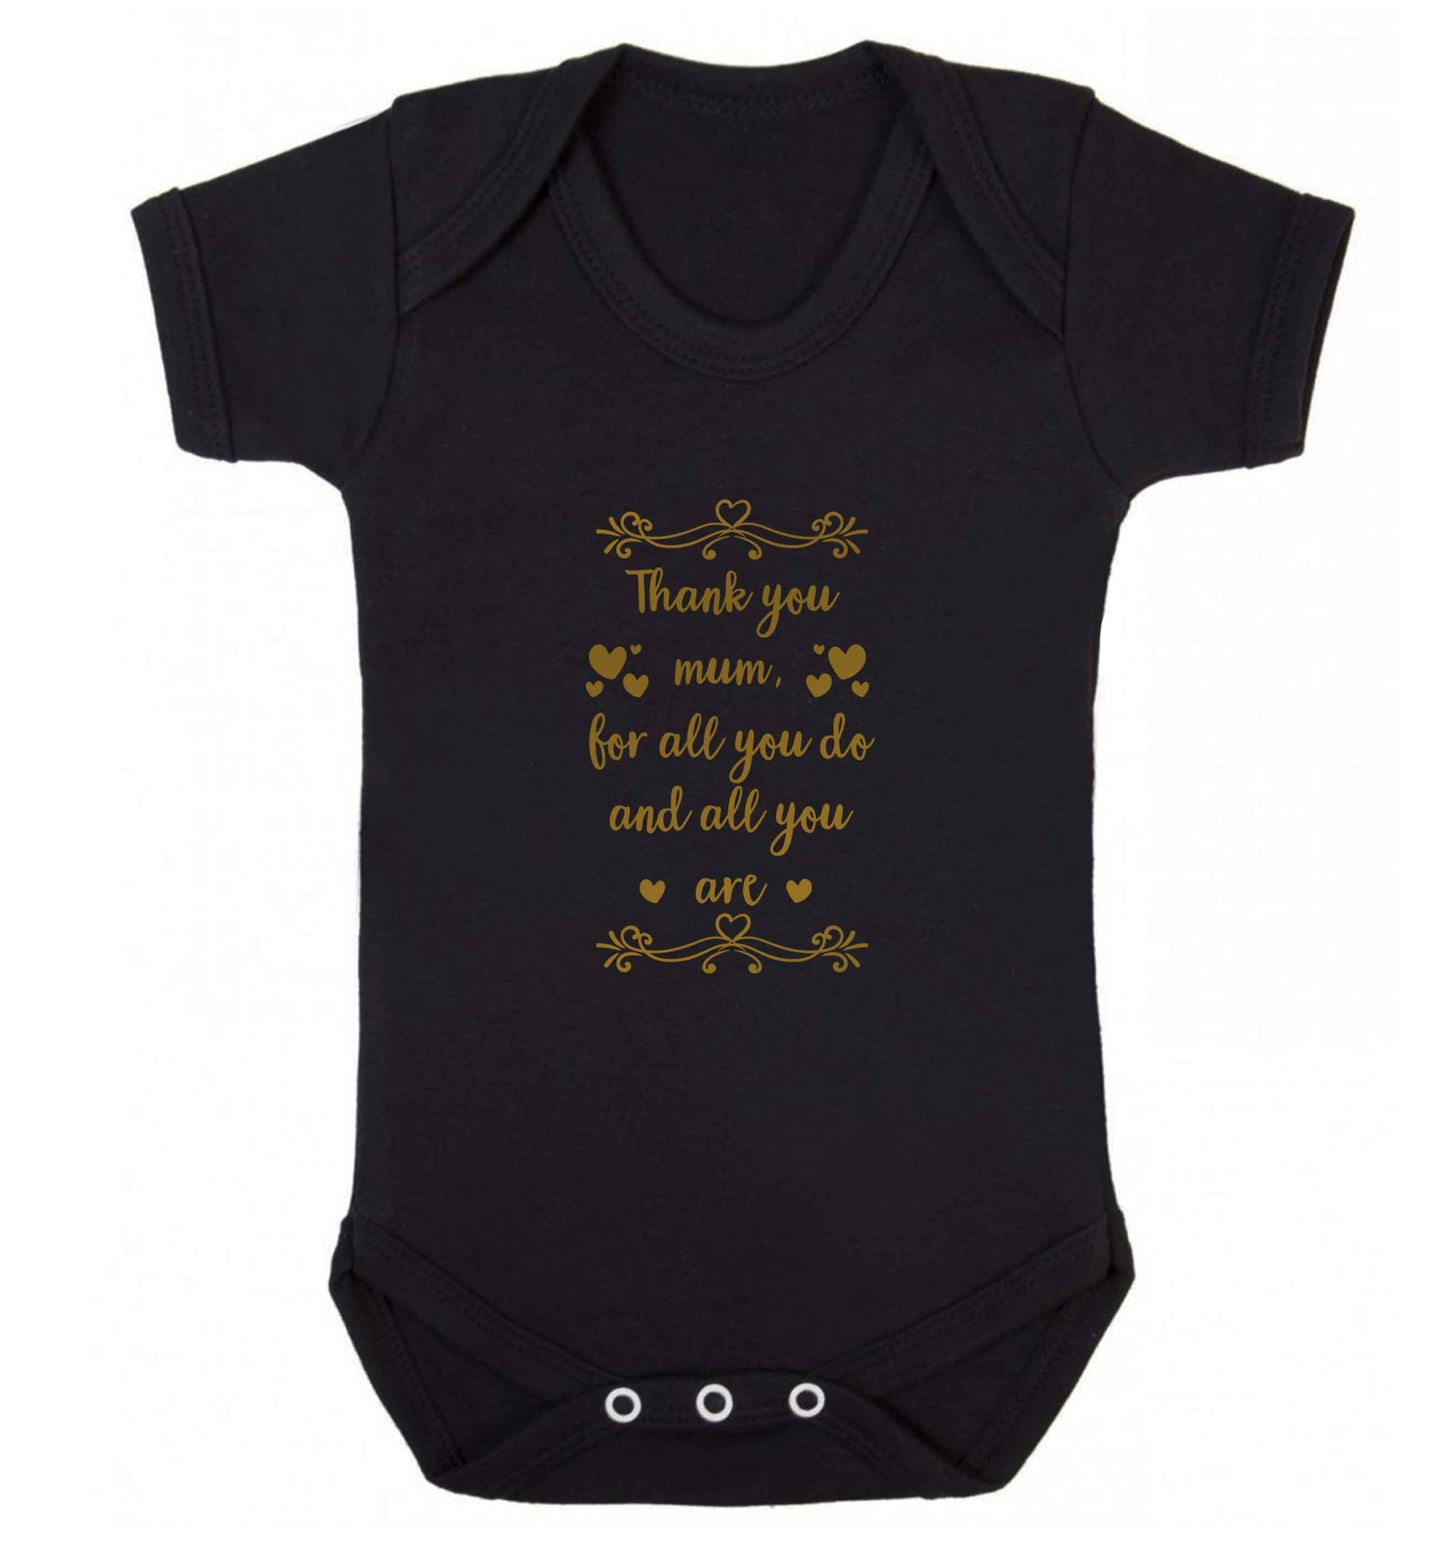 Gorgeous gifts for mums on mother's day! Thank you mum for all you do and all you are baby vest black 18-24 months